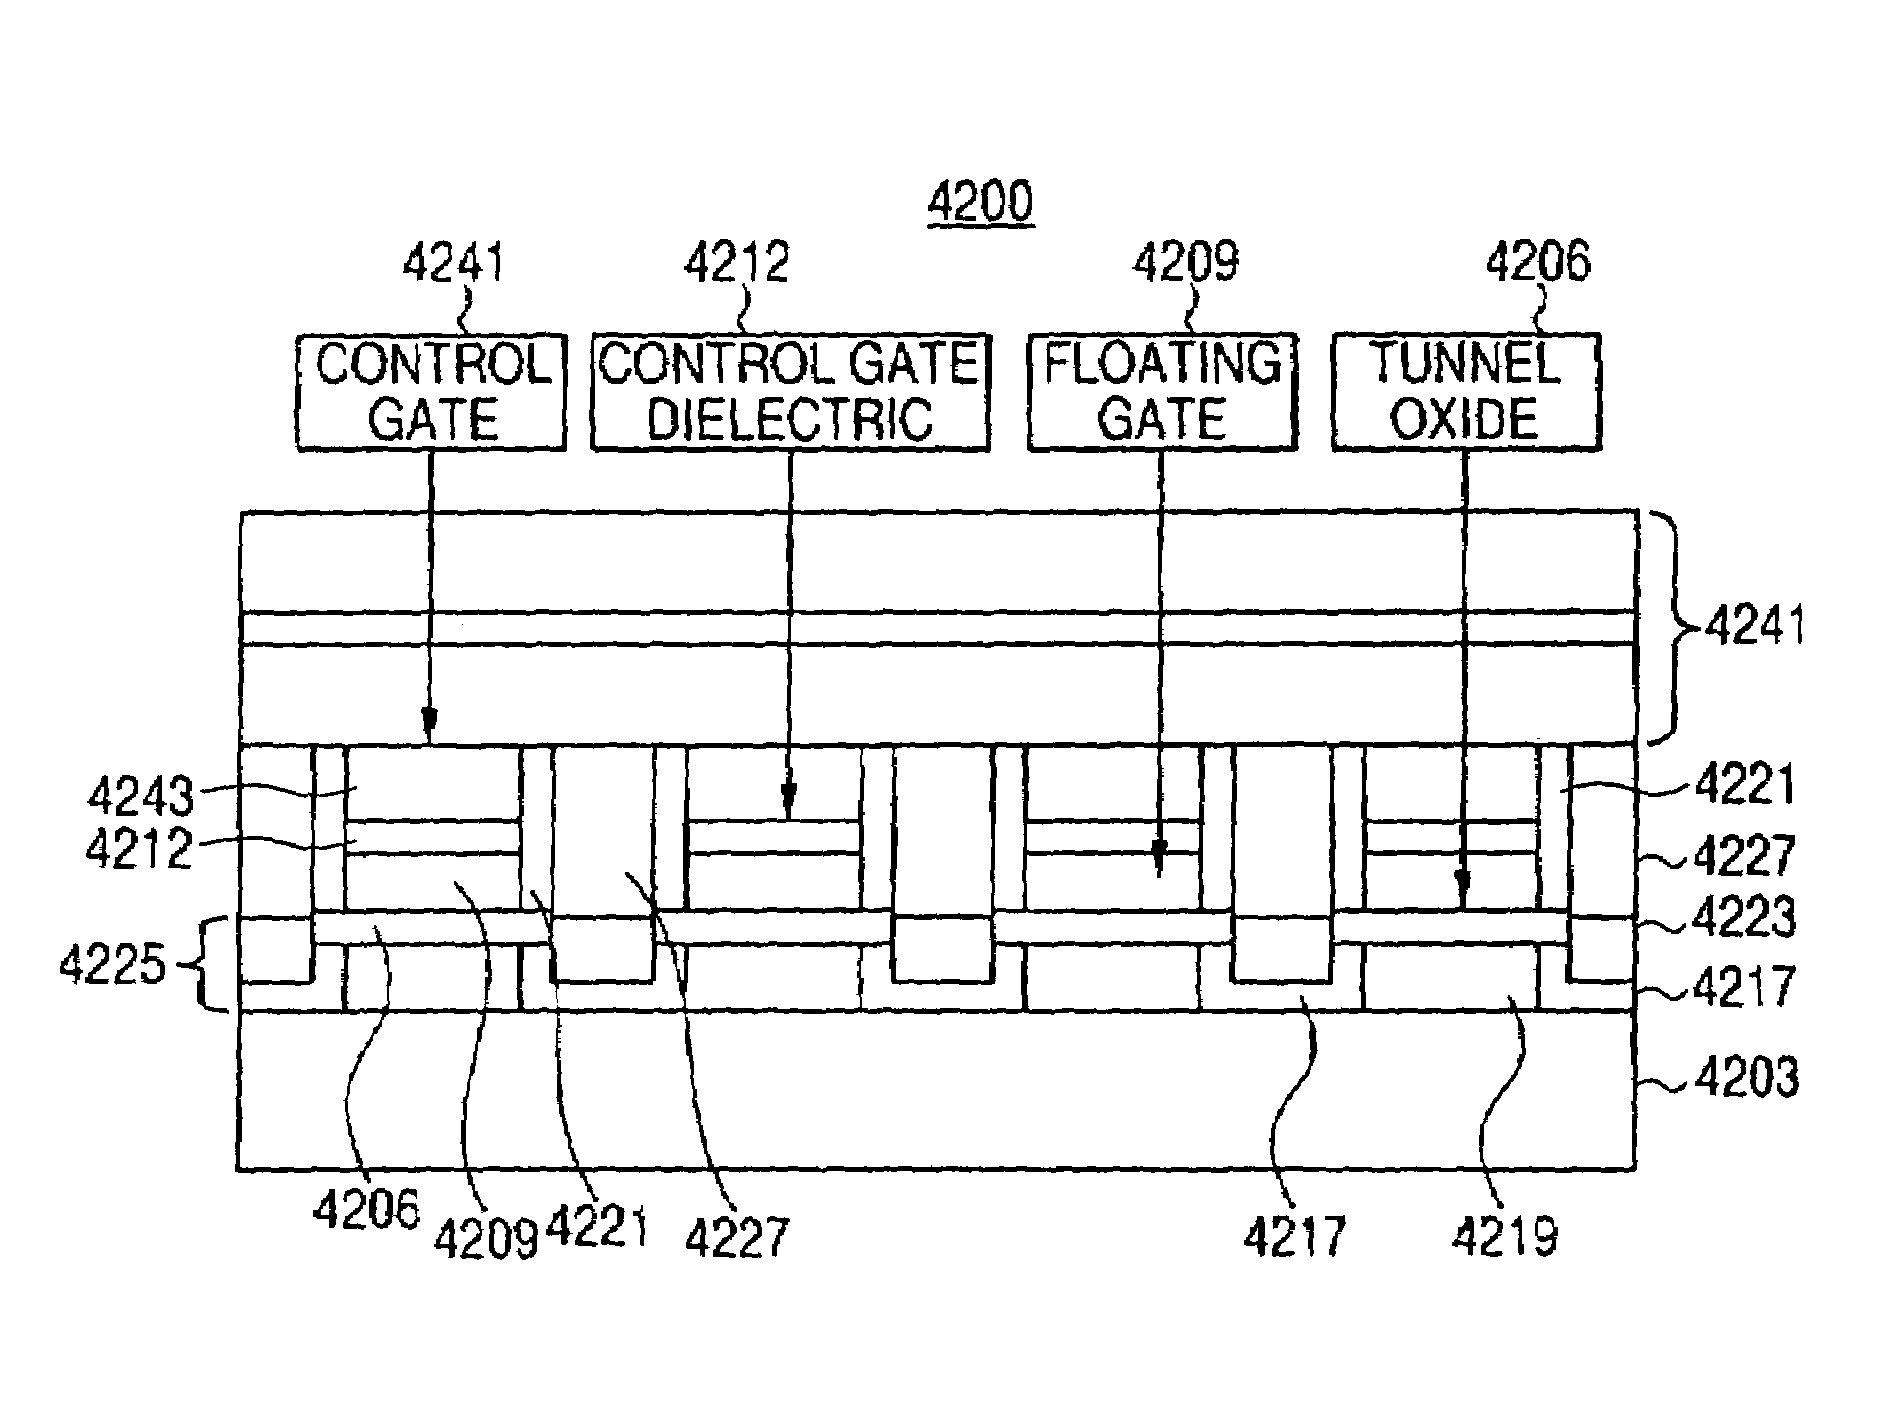 Dense arrays and charge storage devices